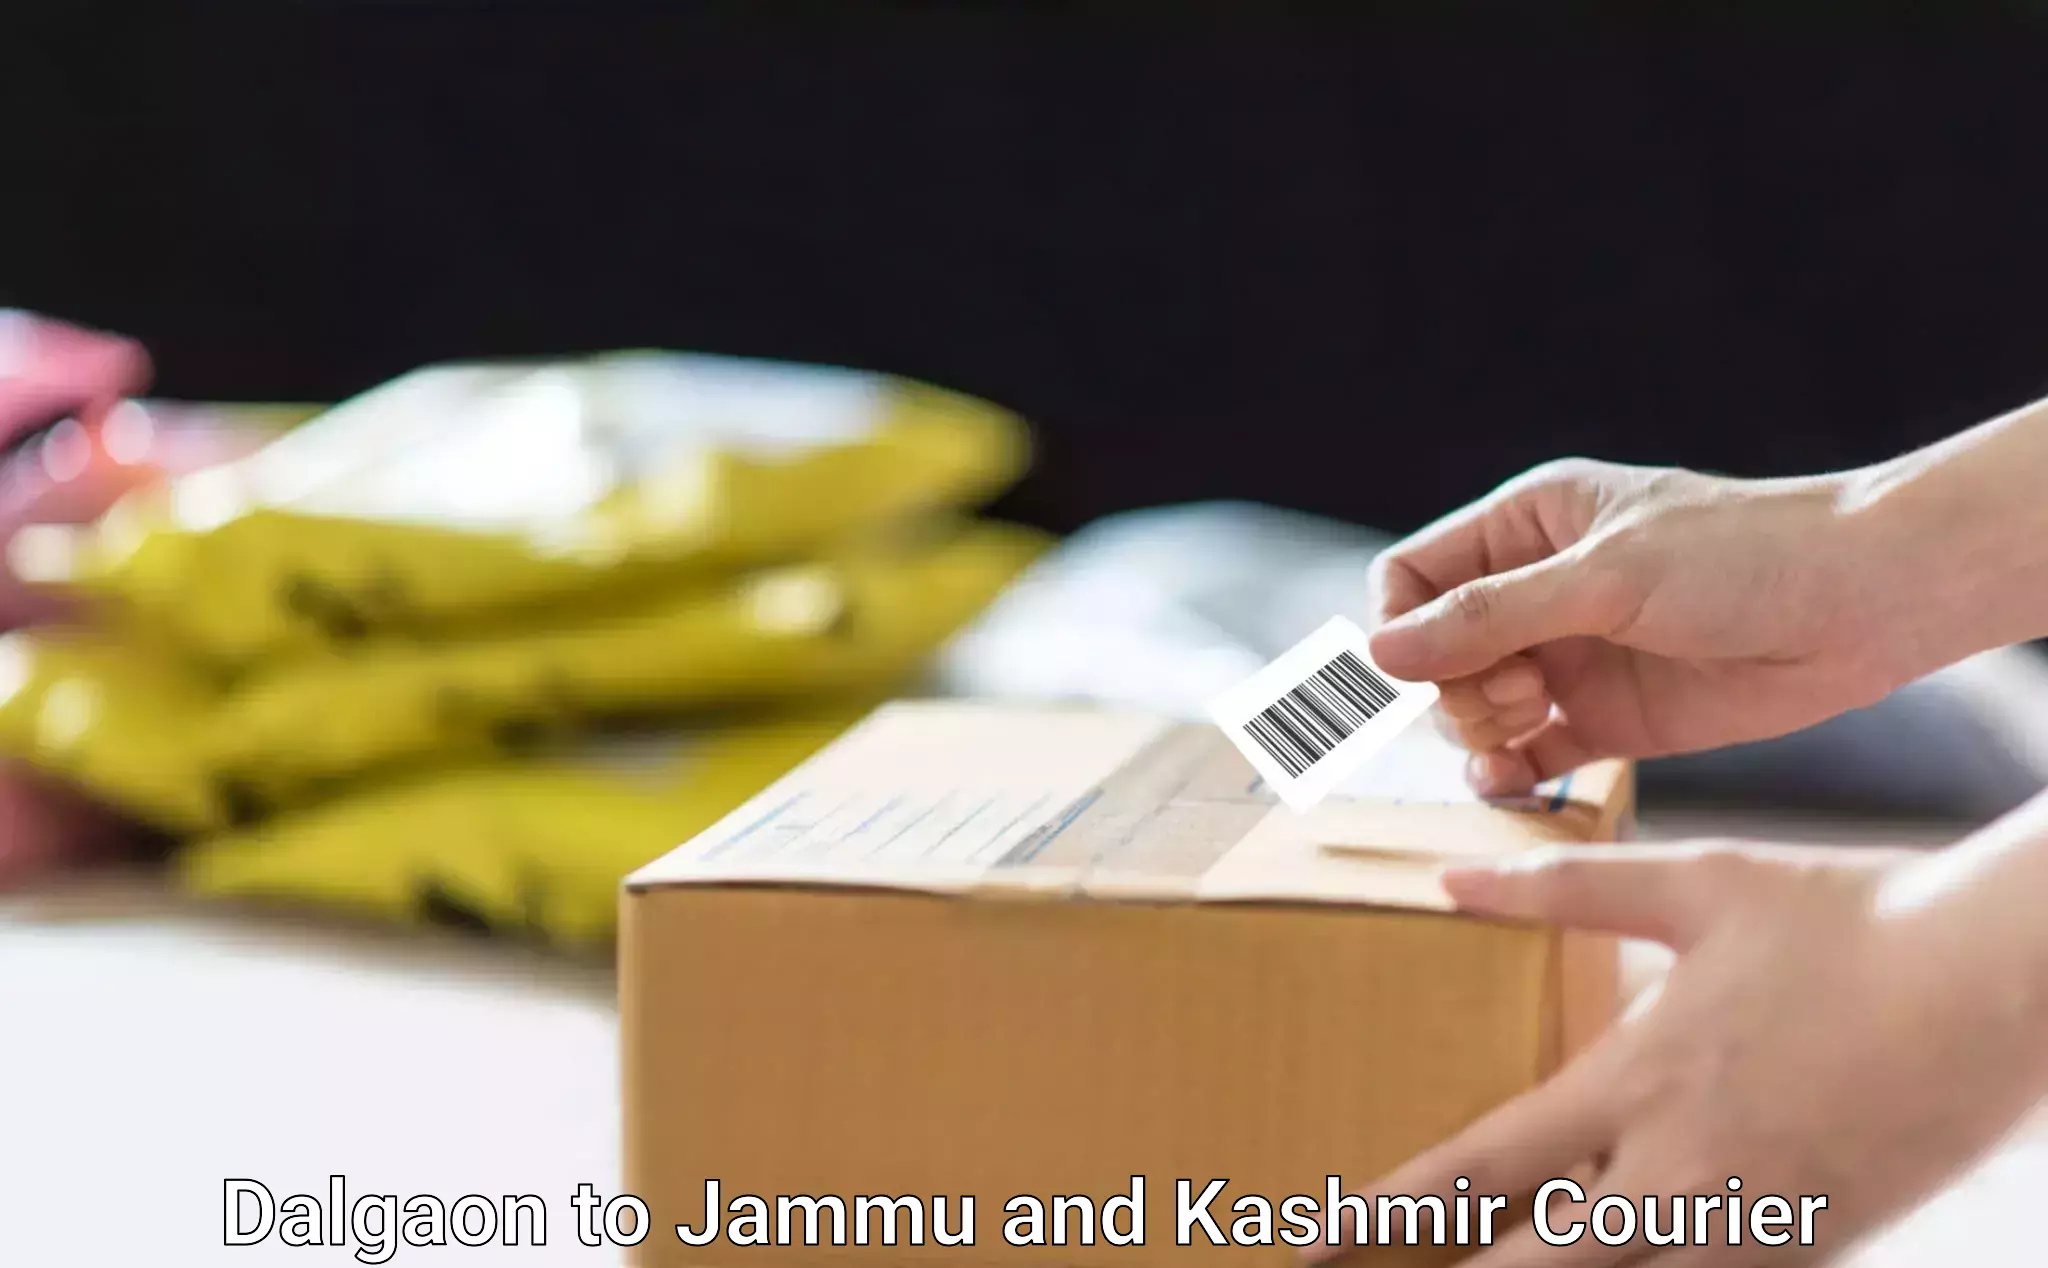 Custom courier packaging in Dalgaon to Jammu and Kashmir